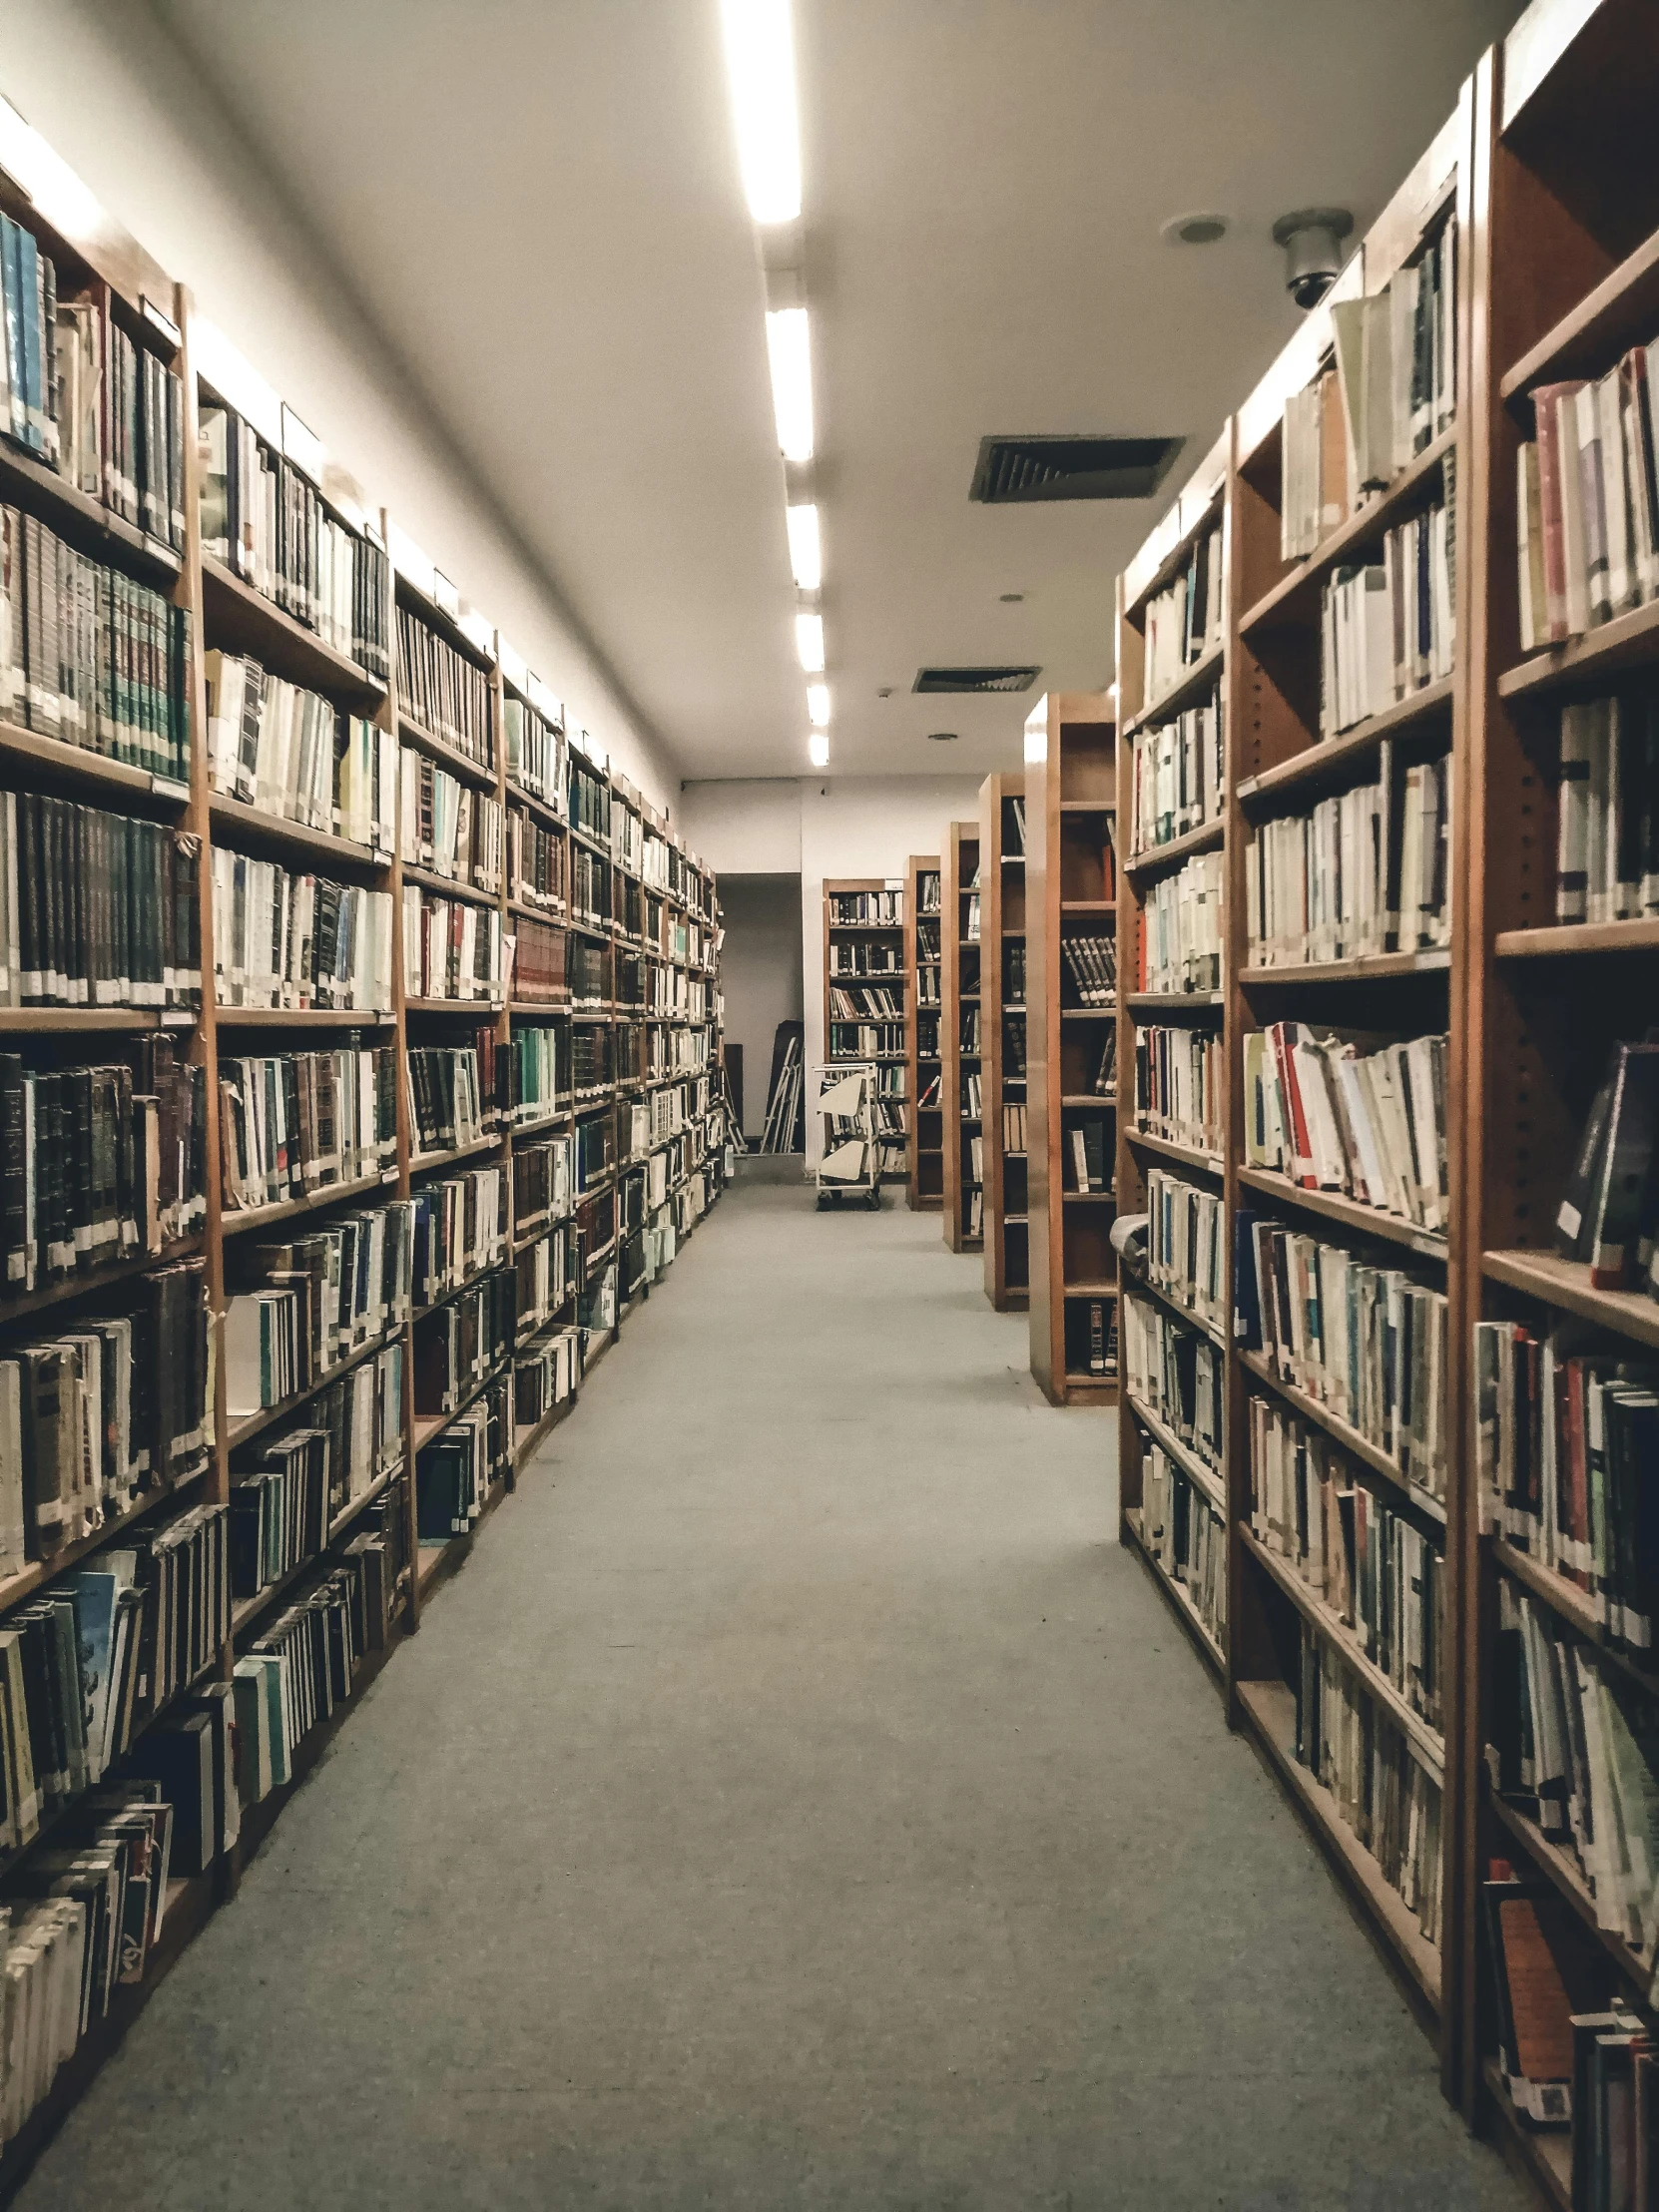 a long row of books in a library, an album cover, unsplash contest winner, reddit post, 2000s photo, movie photo, slight overcast lighting